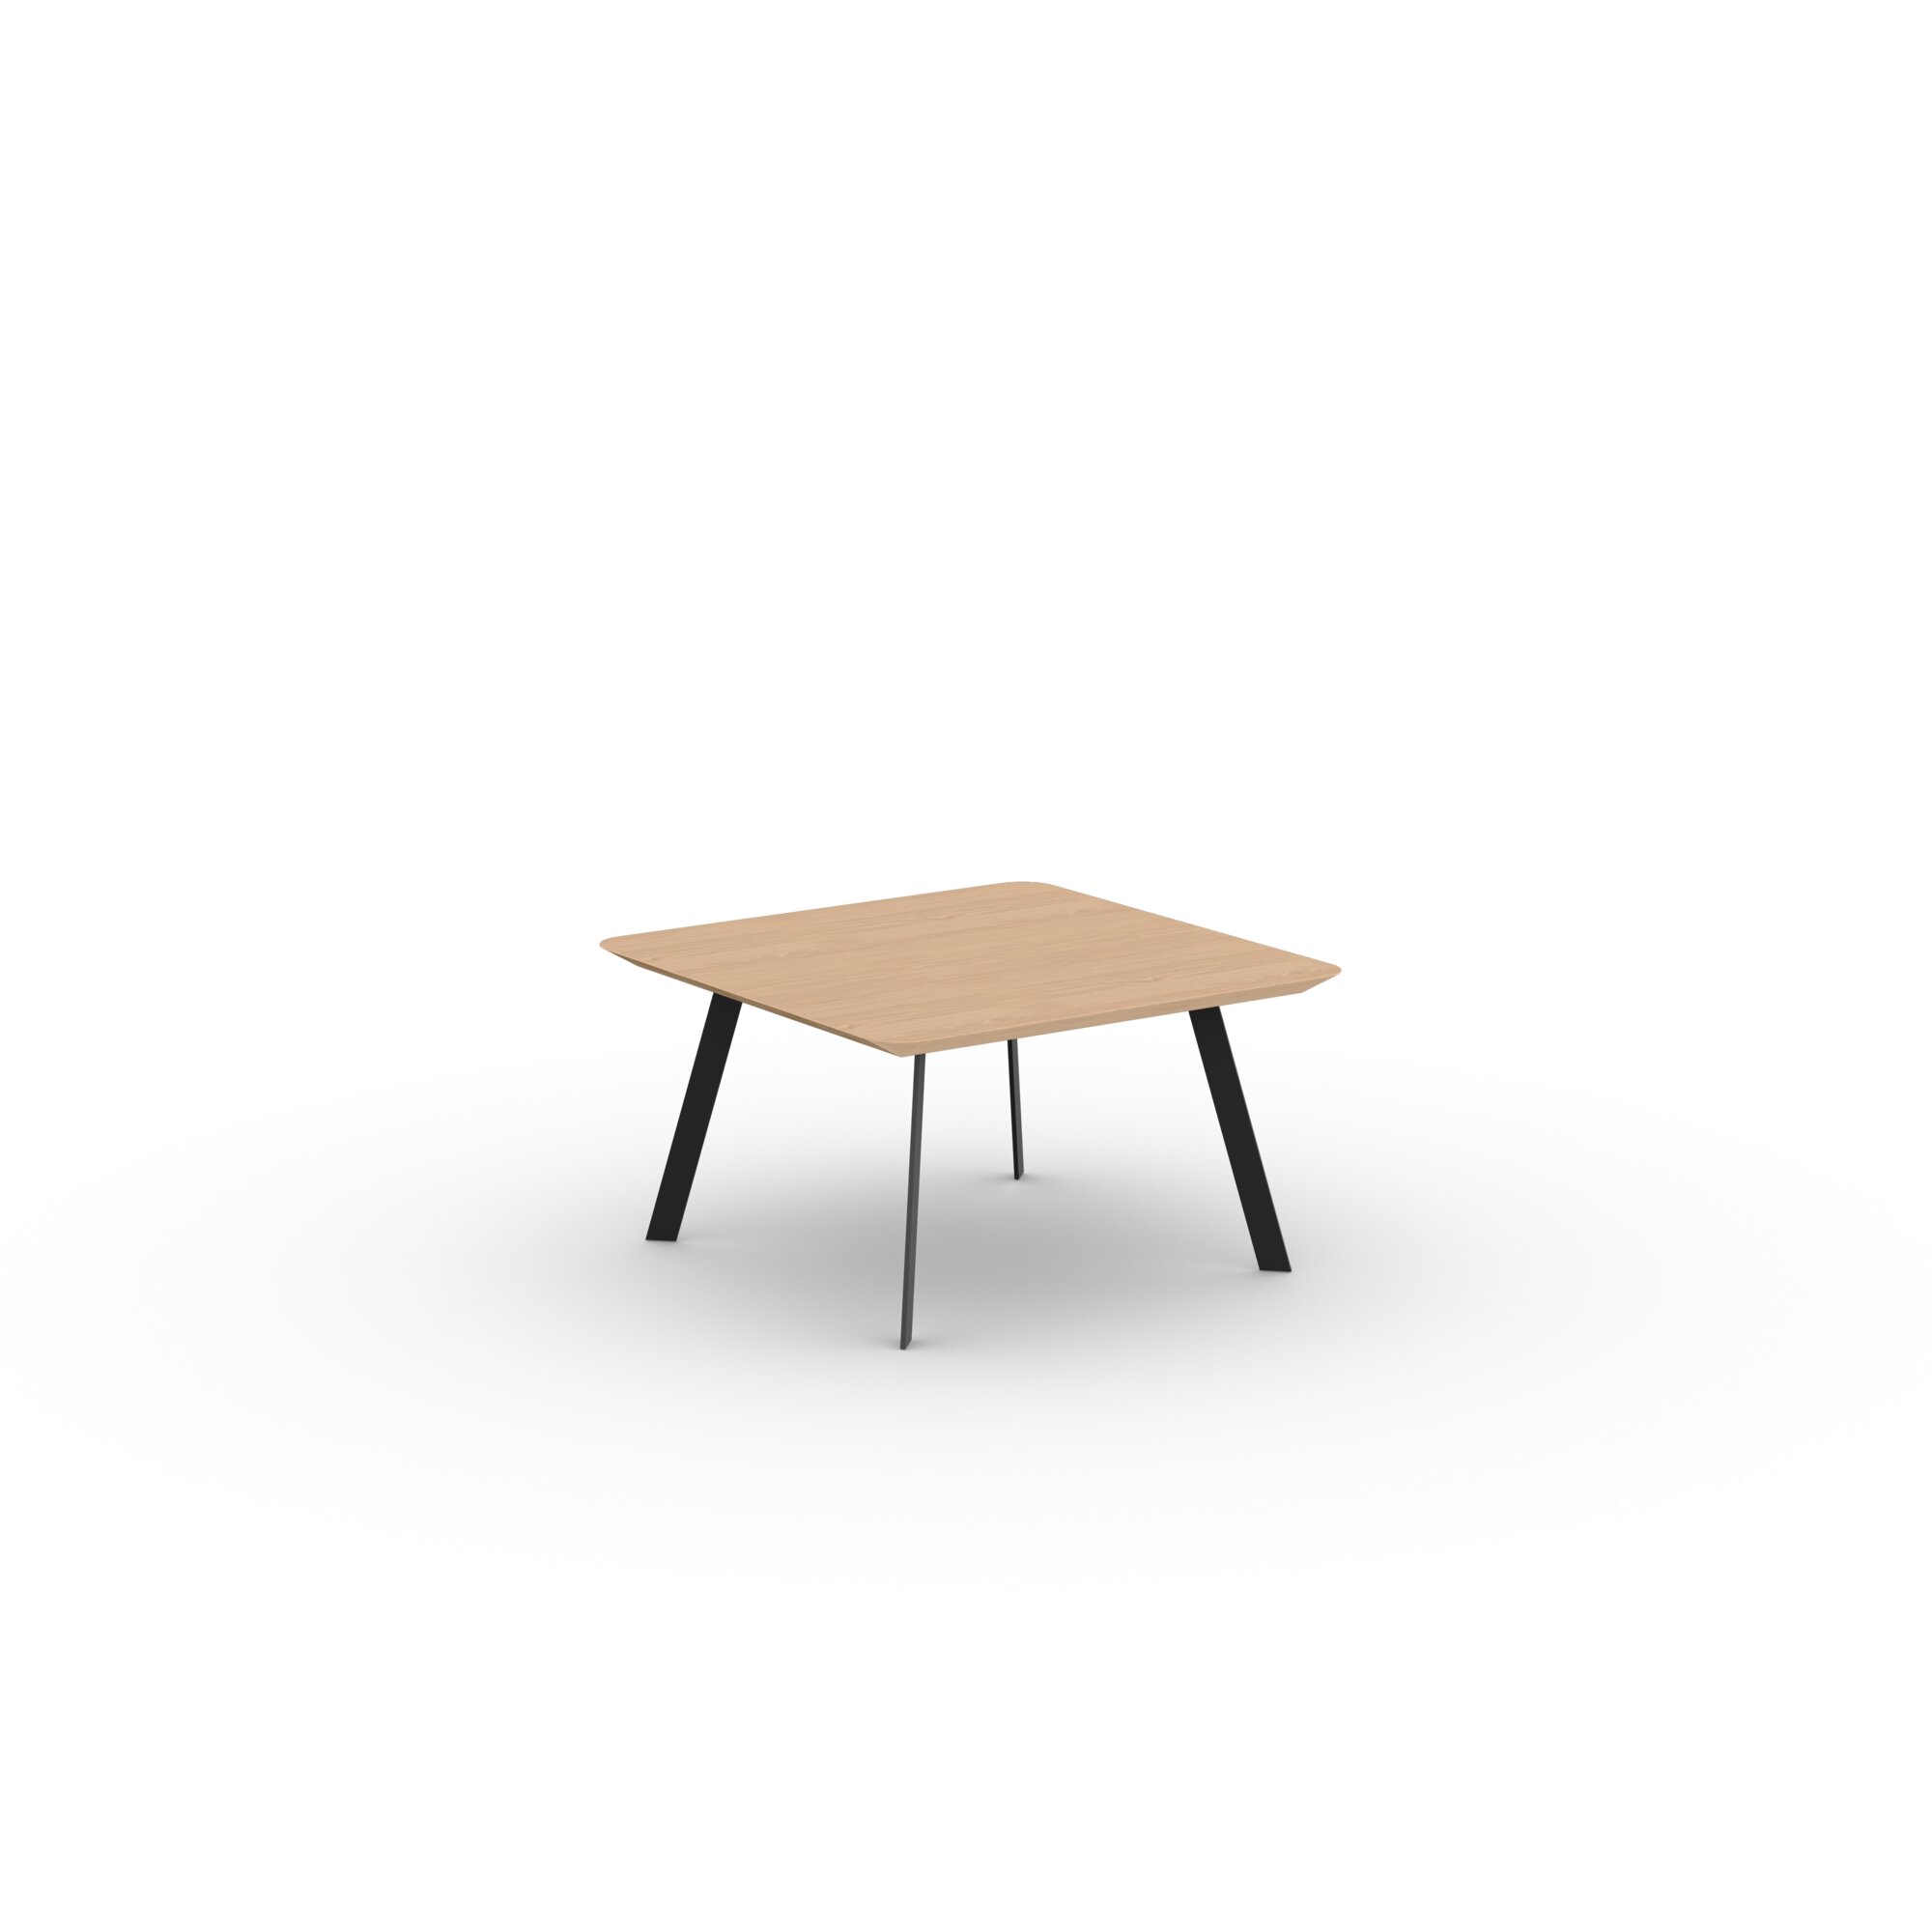 Design Coffee Table | New Co Coffee Table 70 Square Black | Oak hardwax oil natural light 3041 | Studio HENK| 